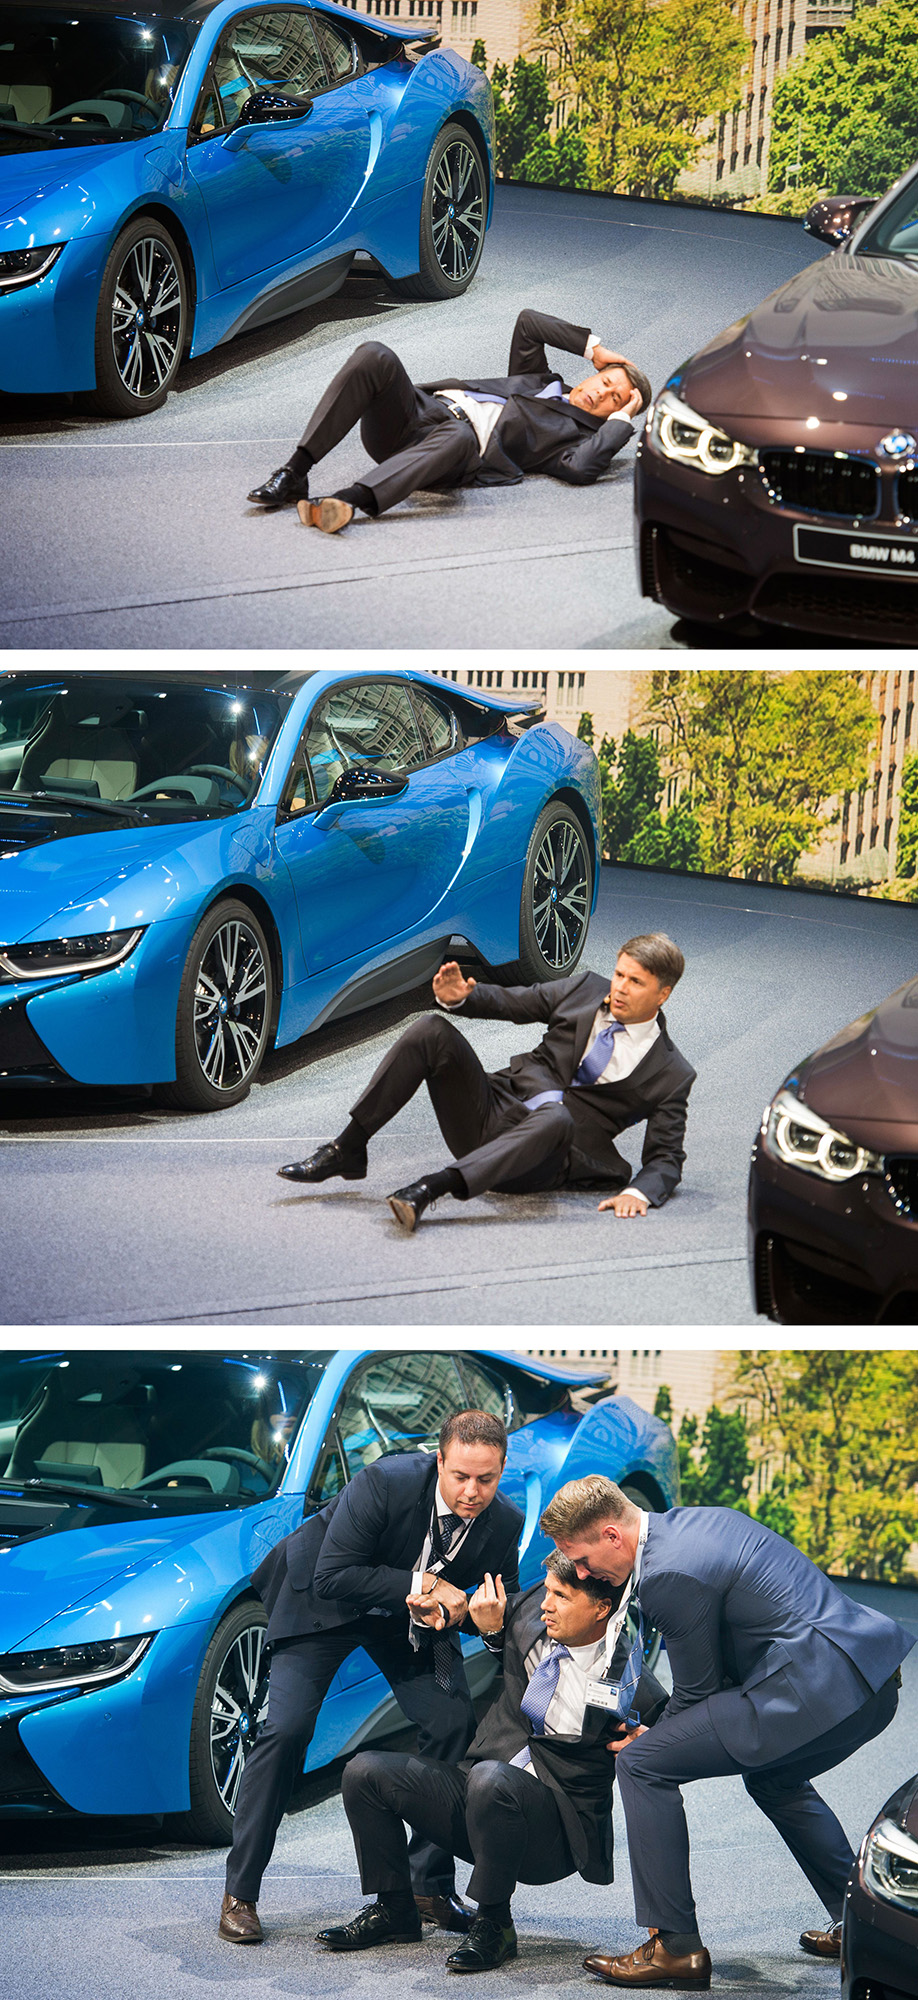 CEO of BMW Harald Krueger falls to the ground after fainting during a presentation at the 66th IAA auto show in Frankfurt on September 15, 2015. Hundreds of thousands of visitors are expected to crowd into the massive exhibition halls of Frankfurt's sprawling trade fair grounds later this week to catch a glimpse of the latest models and high tech innovations. AFP PHOTO / ODD ANDERSEN (Photo credit should read ODD ANDERSEN/AFP/Getty Images)